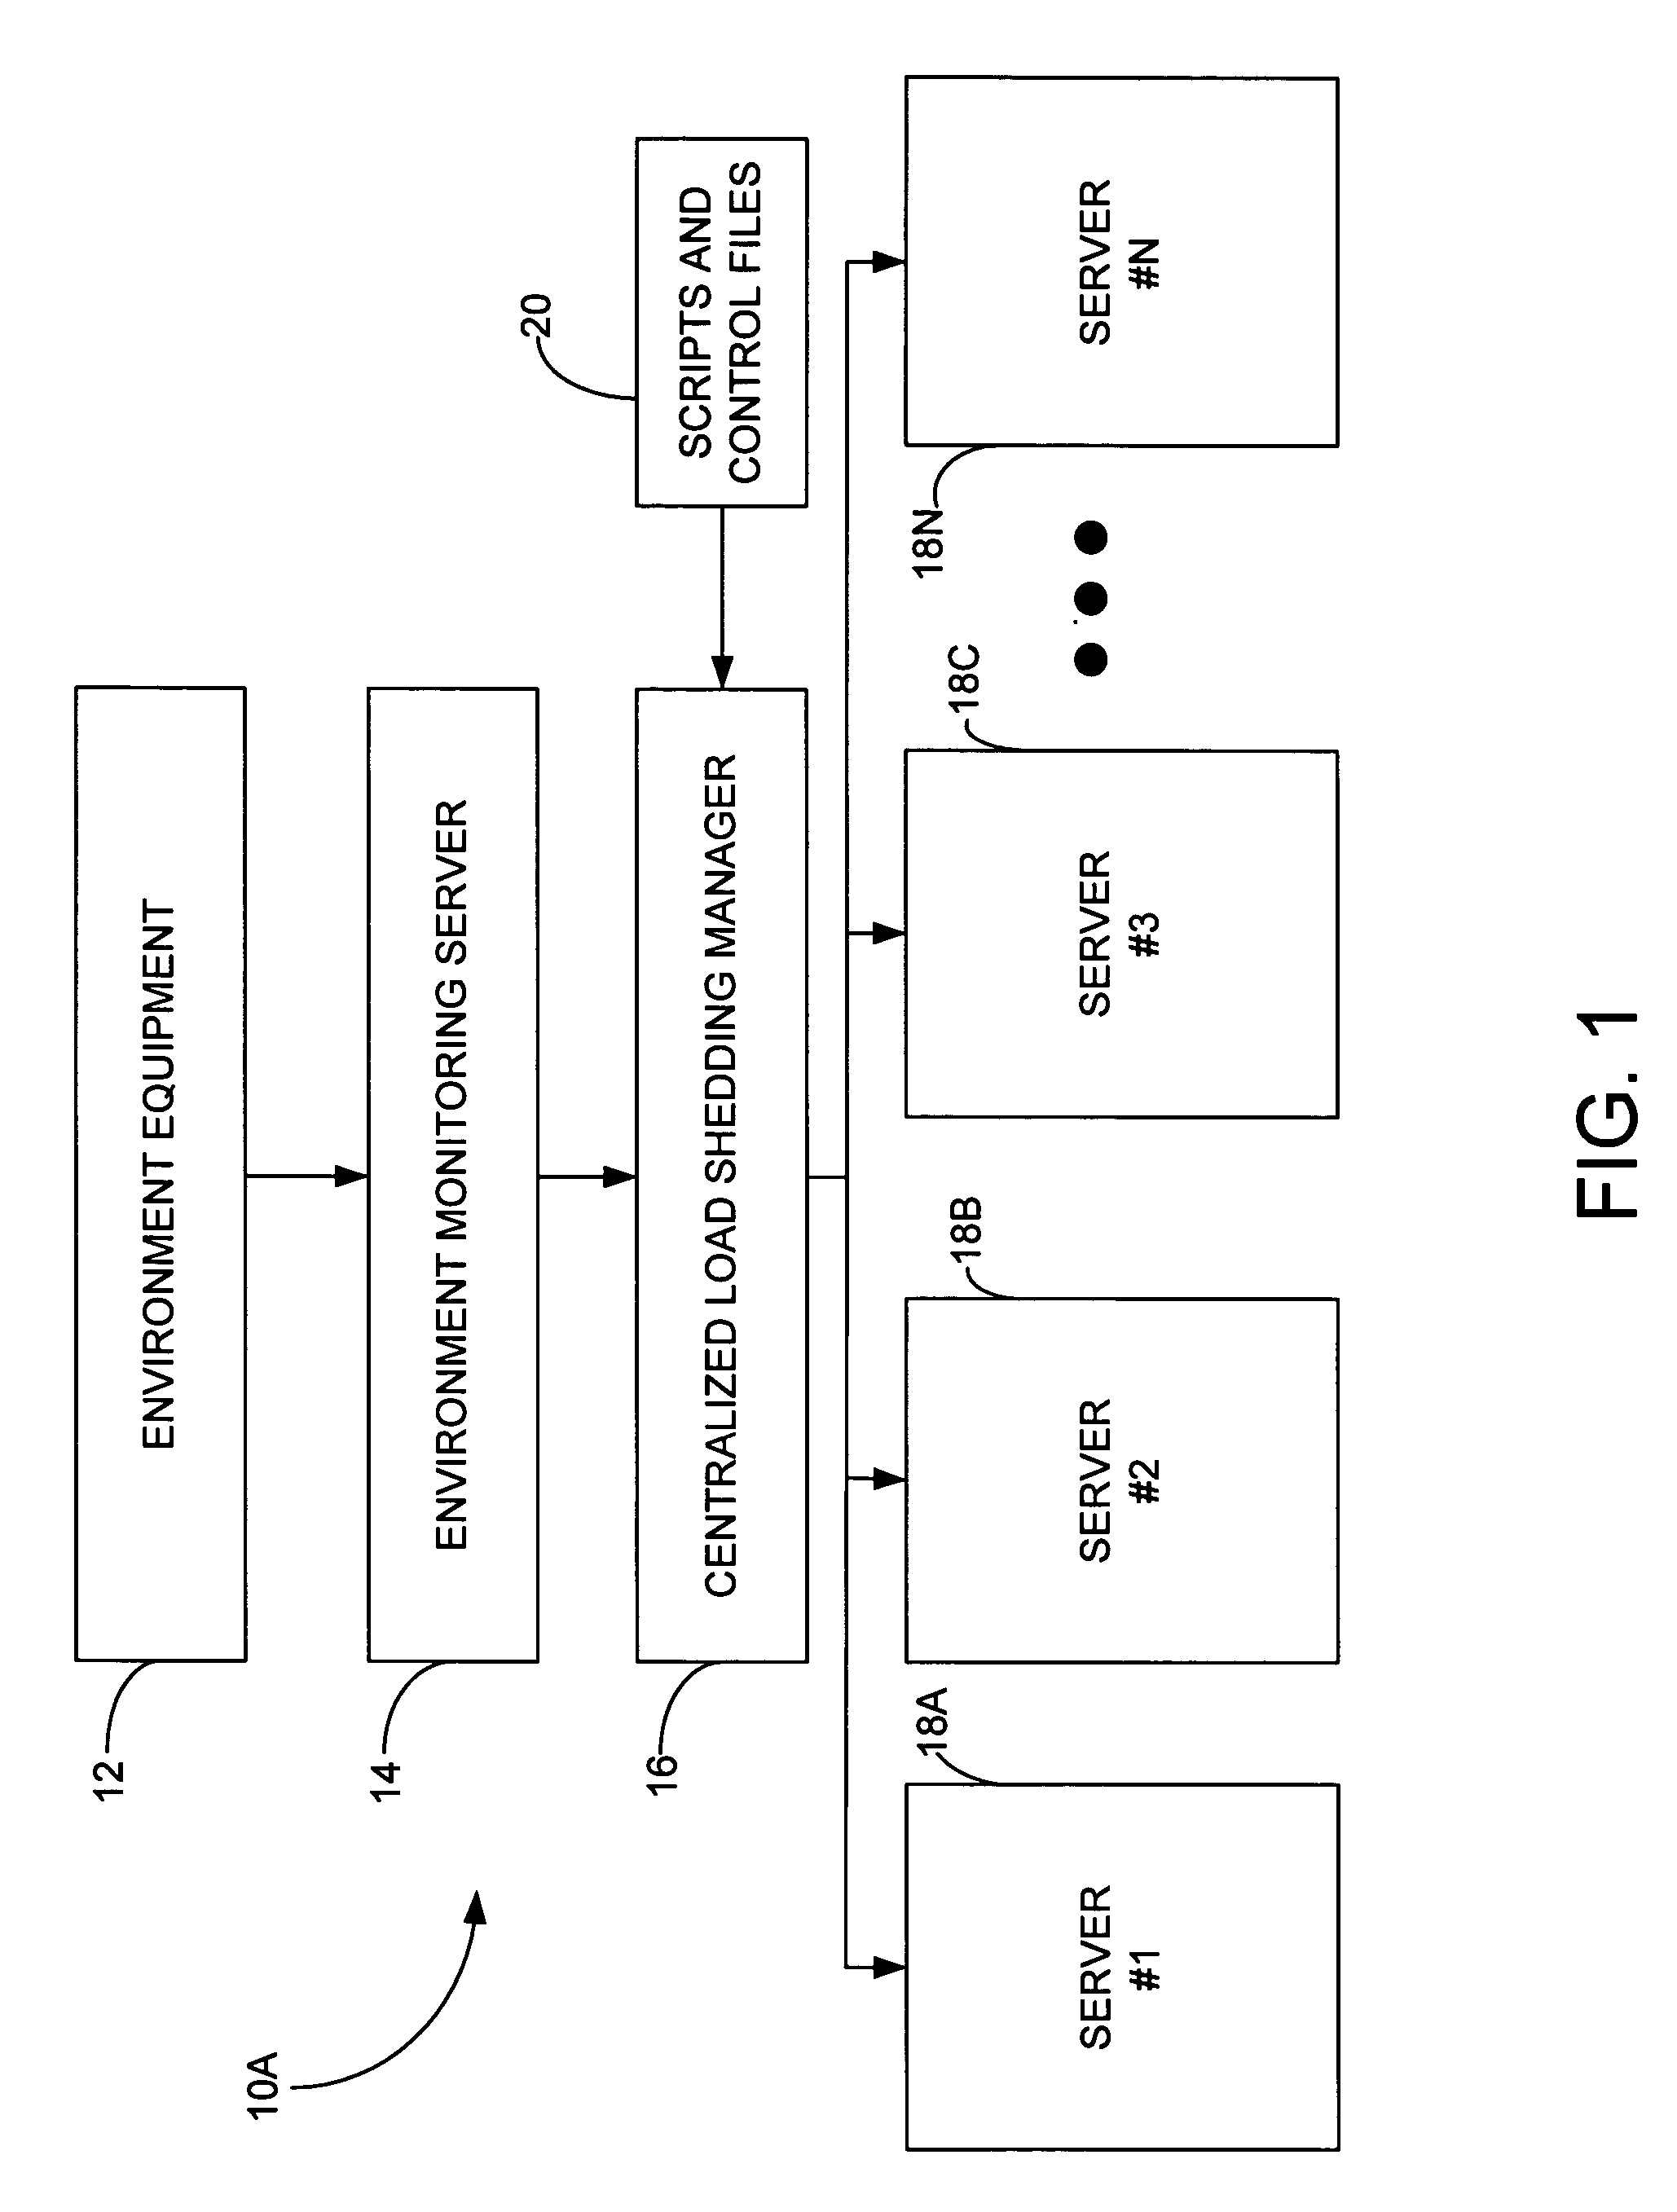 Method, apparatus and program product for managing the operation of a computing complex during a utility interruption